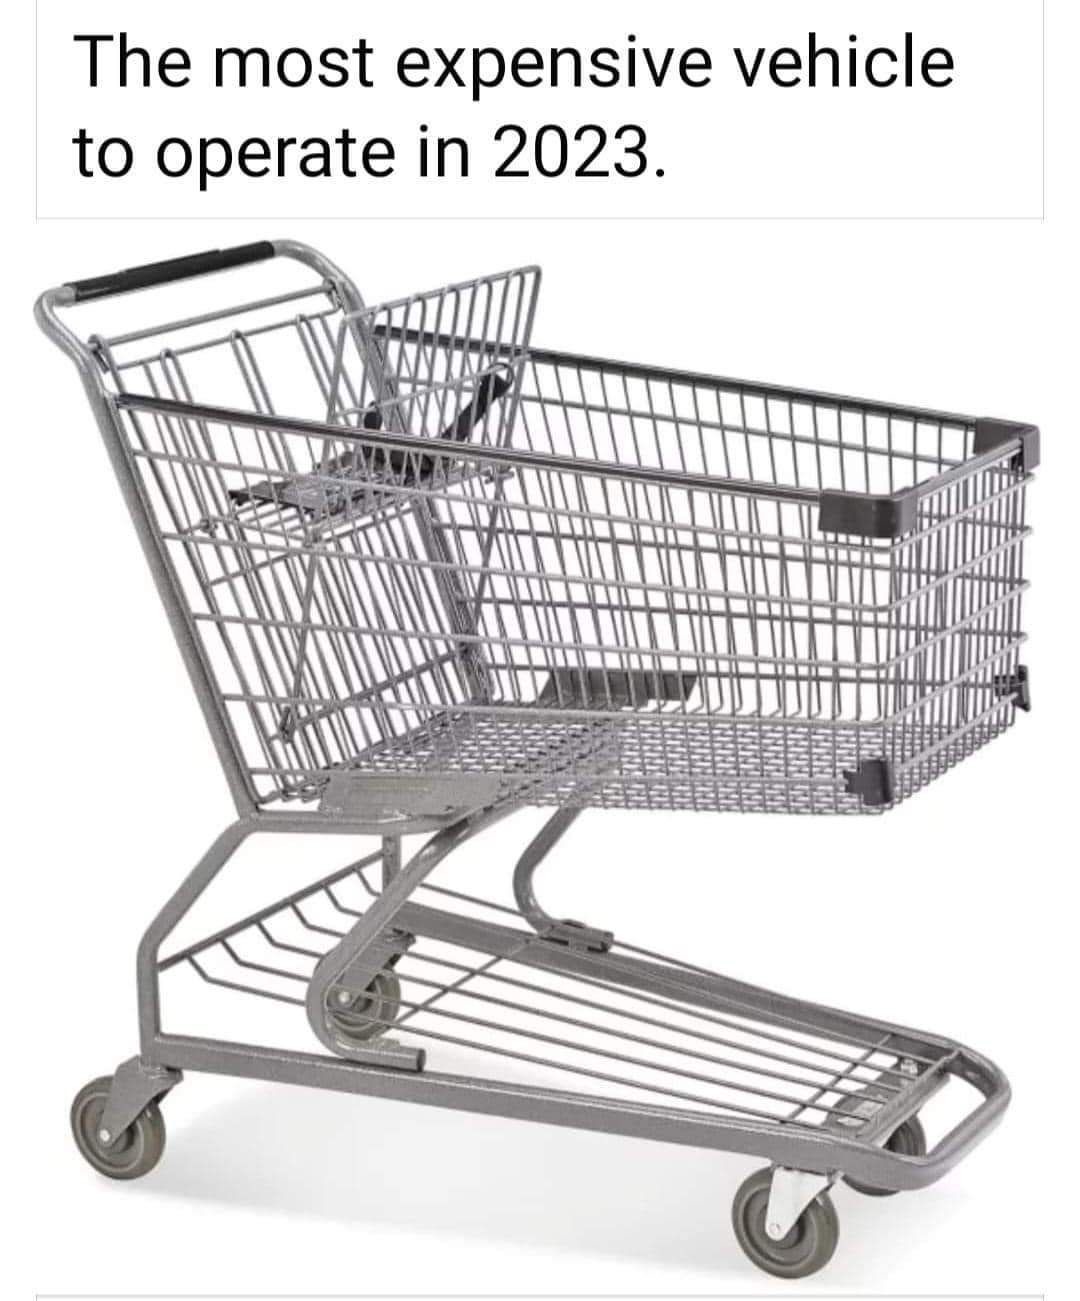 Most expensive vehicle to operate in 2023 - meme